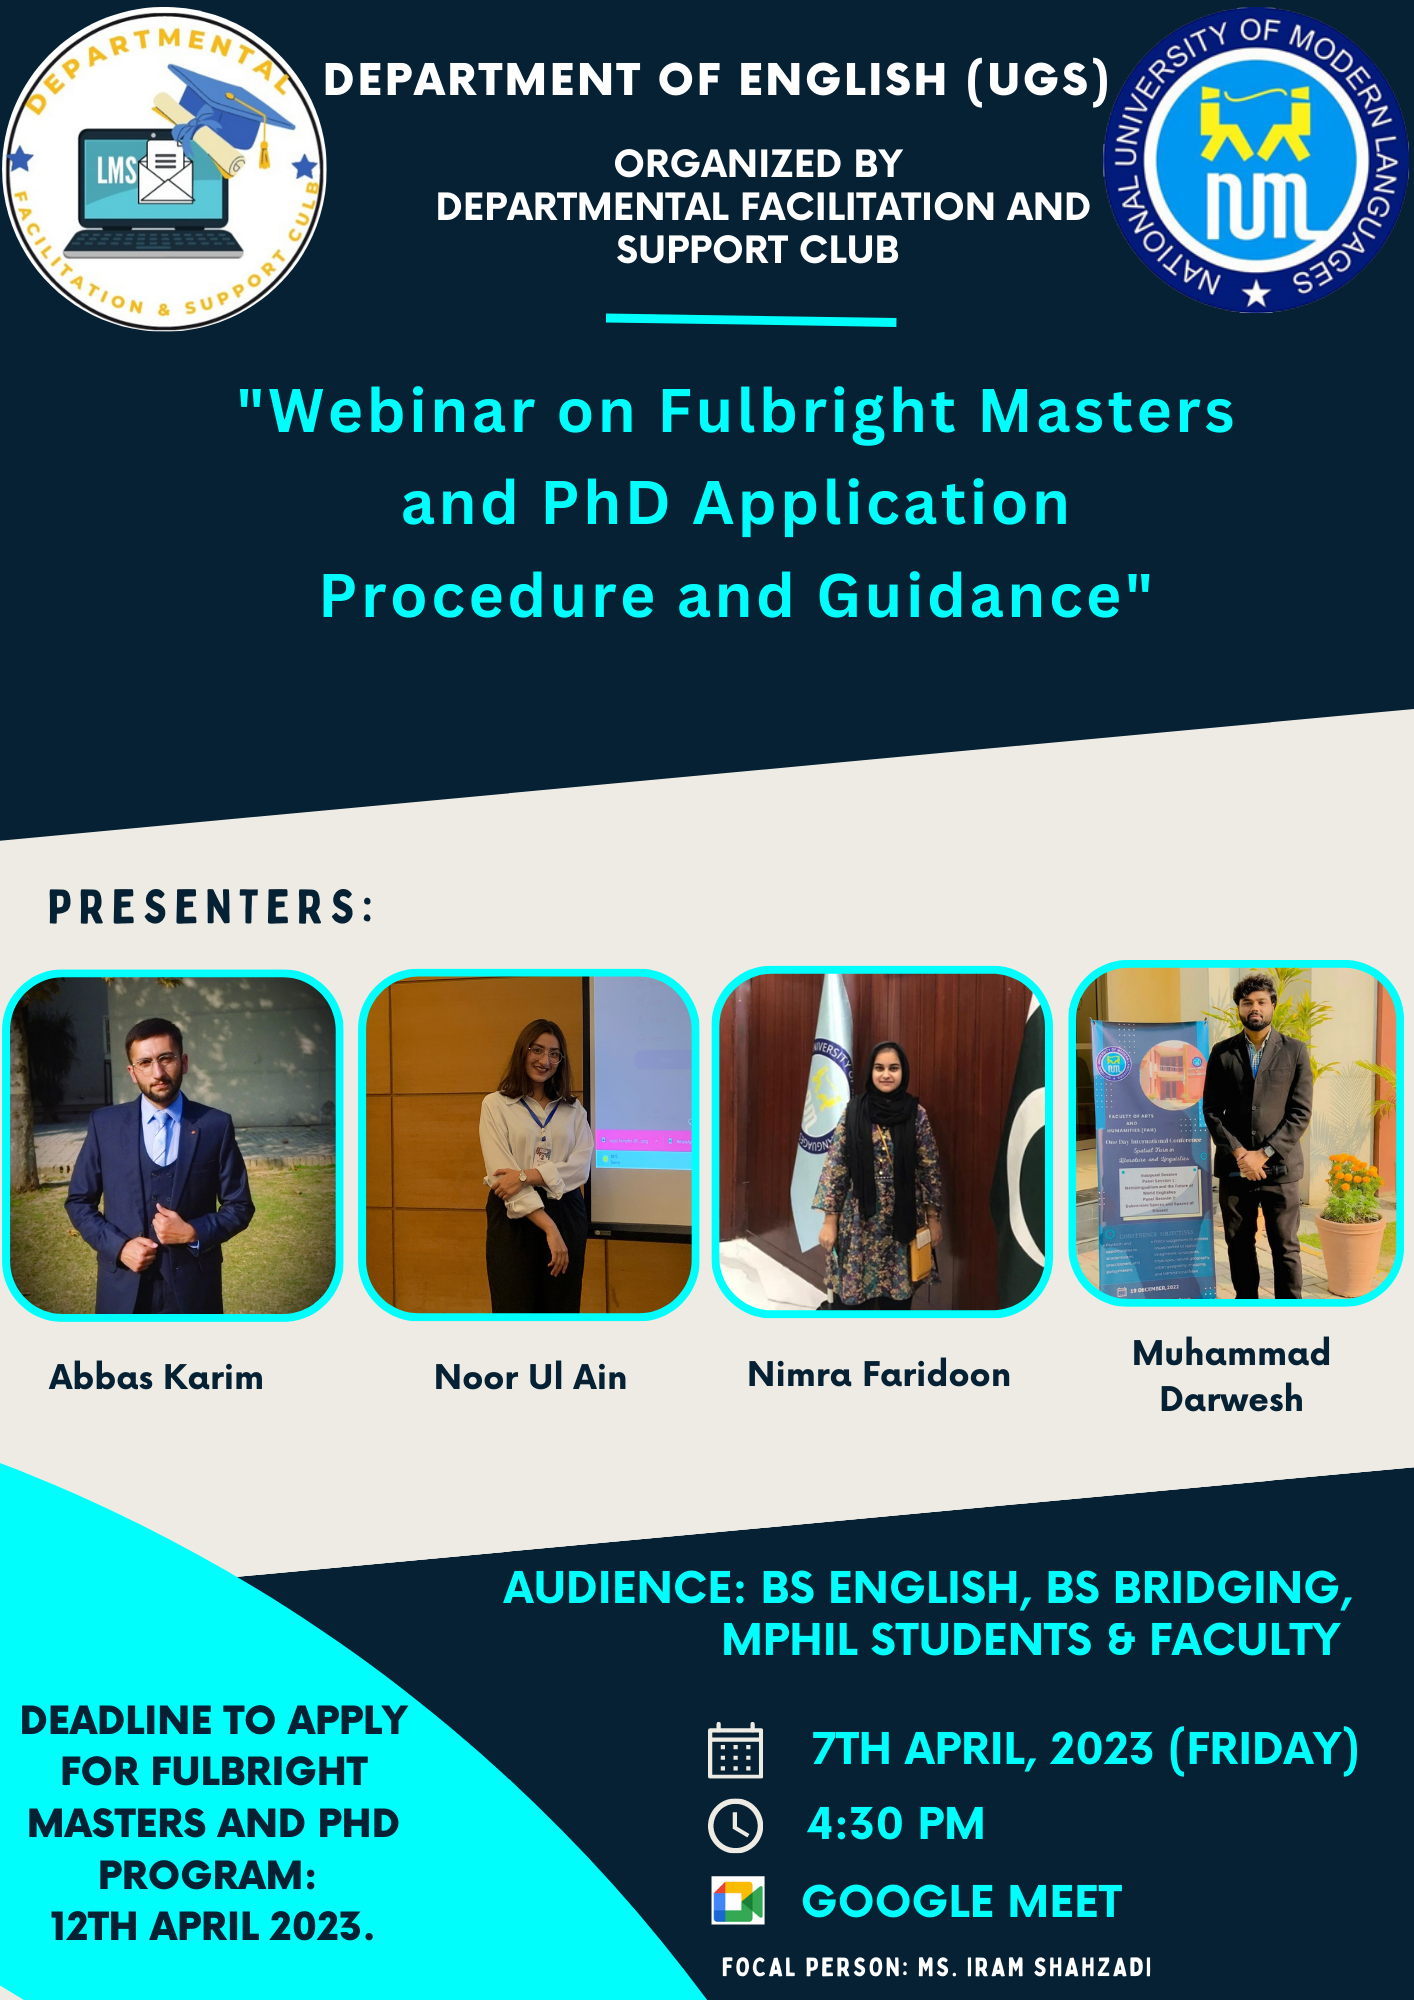 Webinar on Fulbright Masters and PhD Application Procedure and Guidance by Departmental Facilitation & Support Club (DFSC)